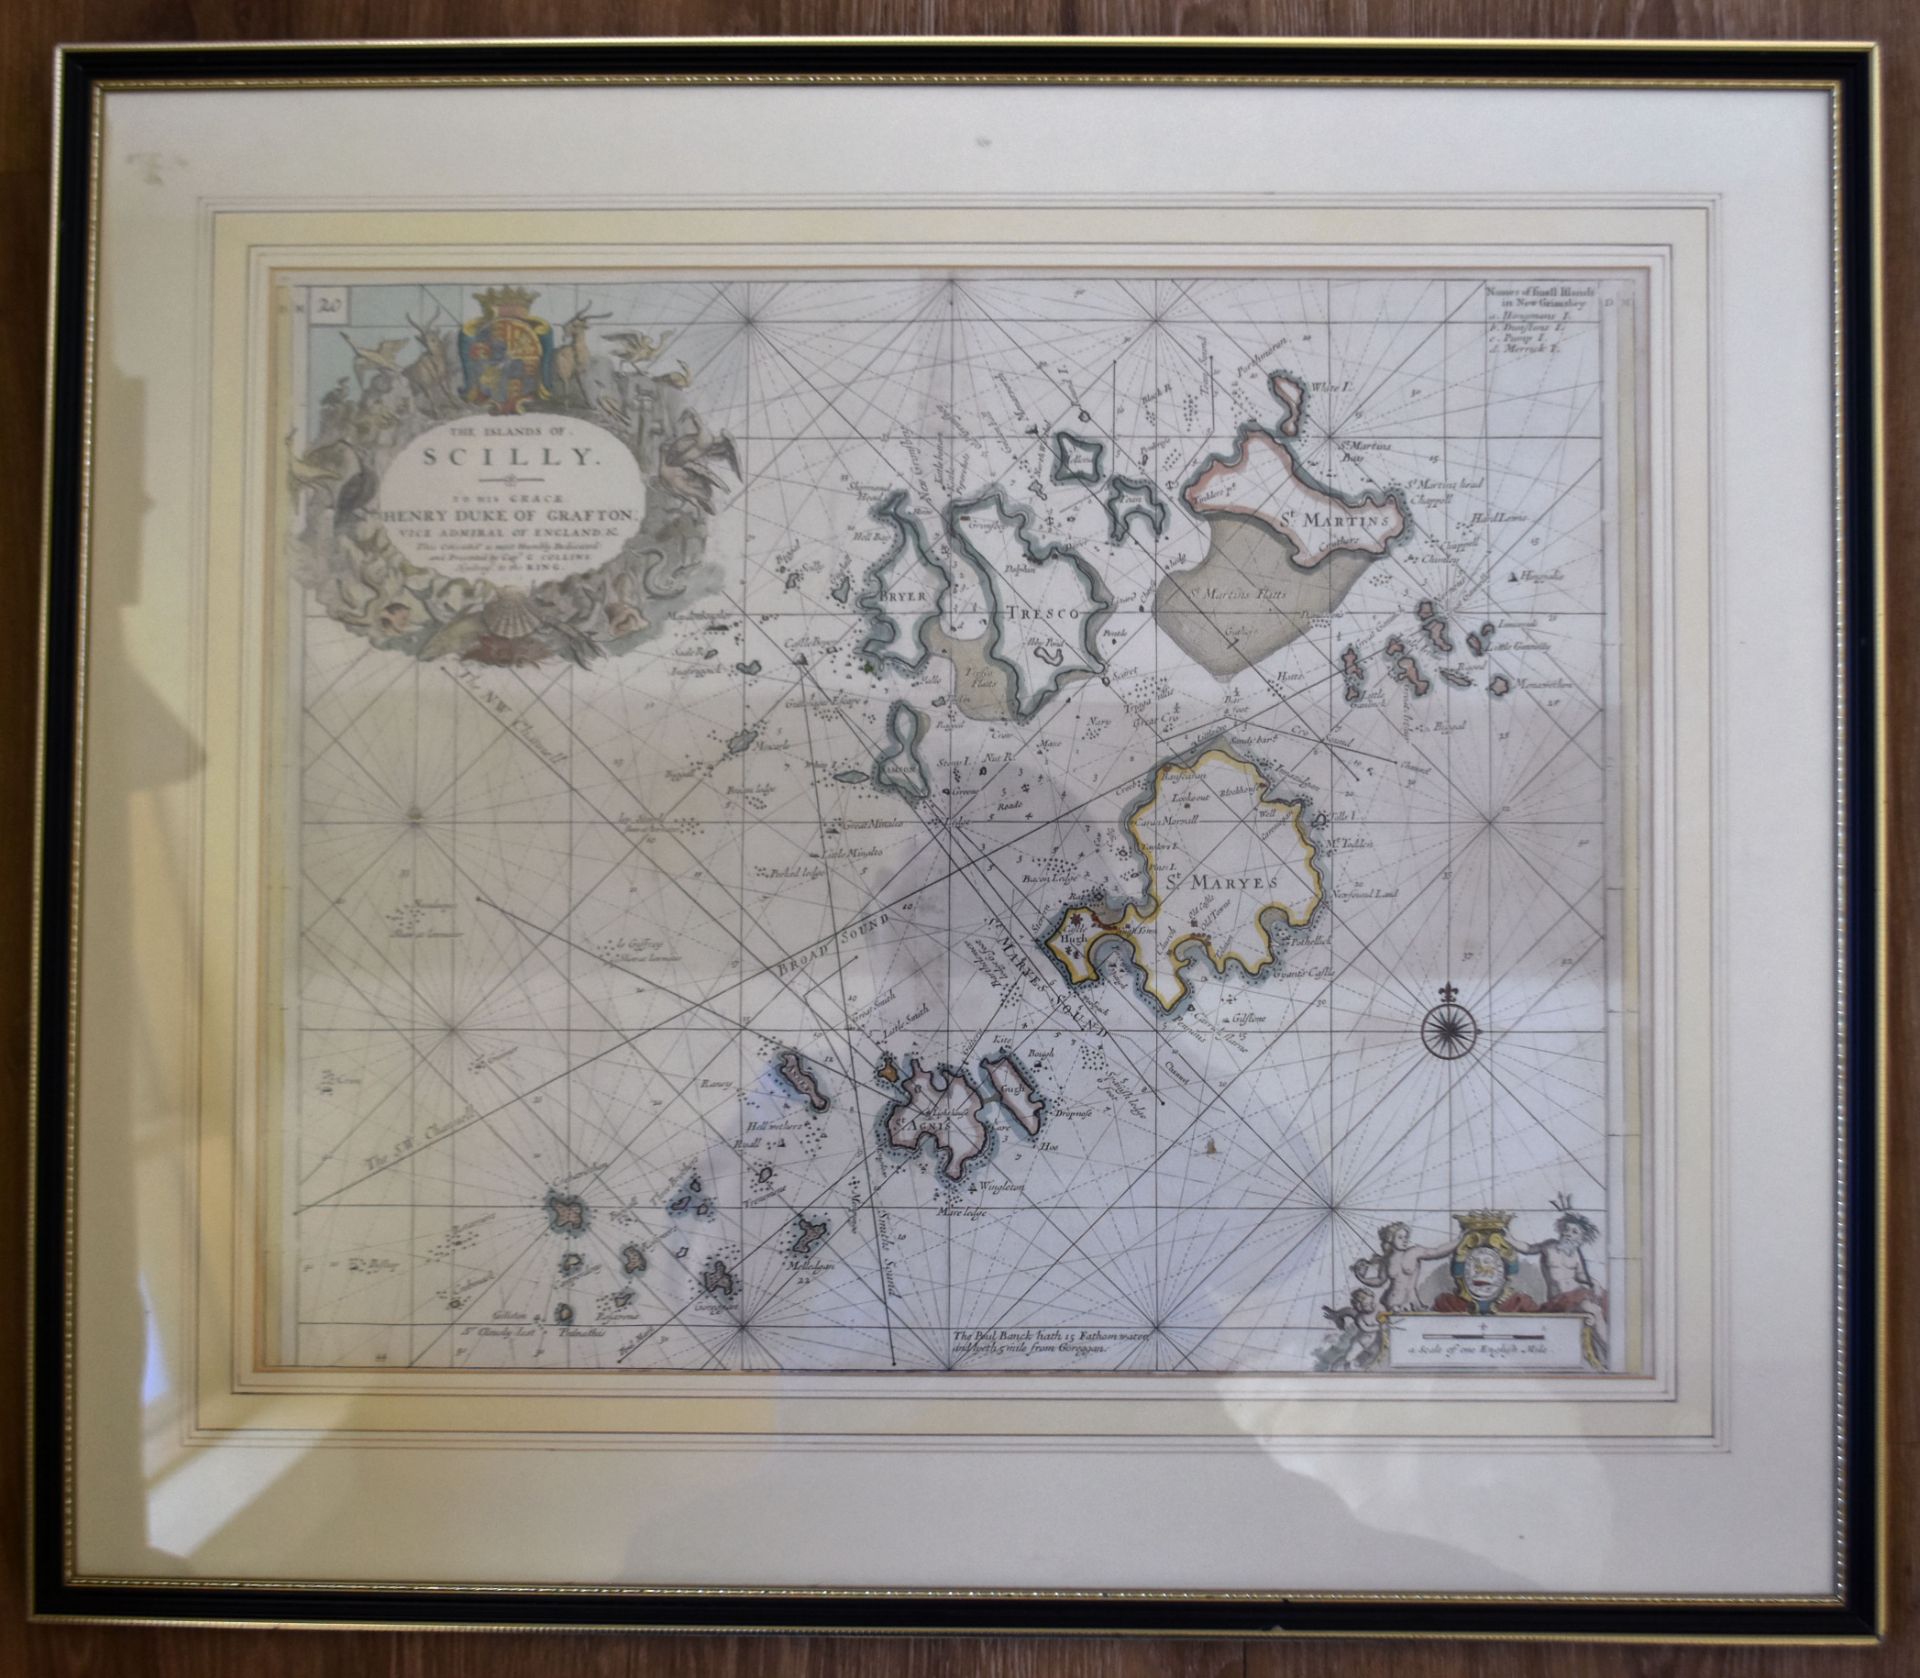 Map of The Isles of Scilly by Captain Greenville Collins c. 1774